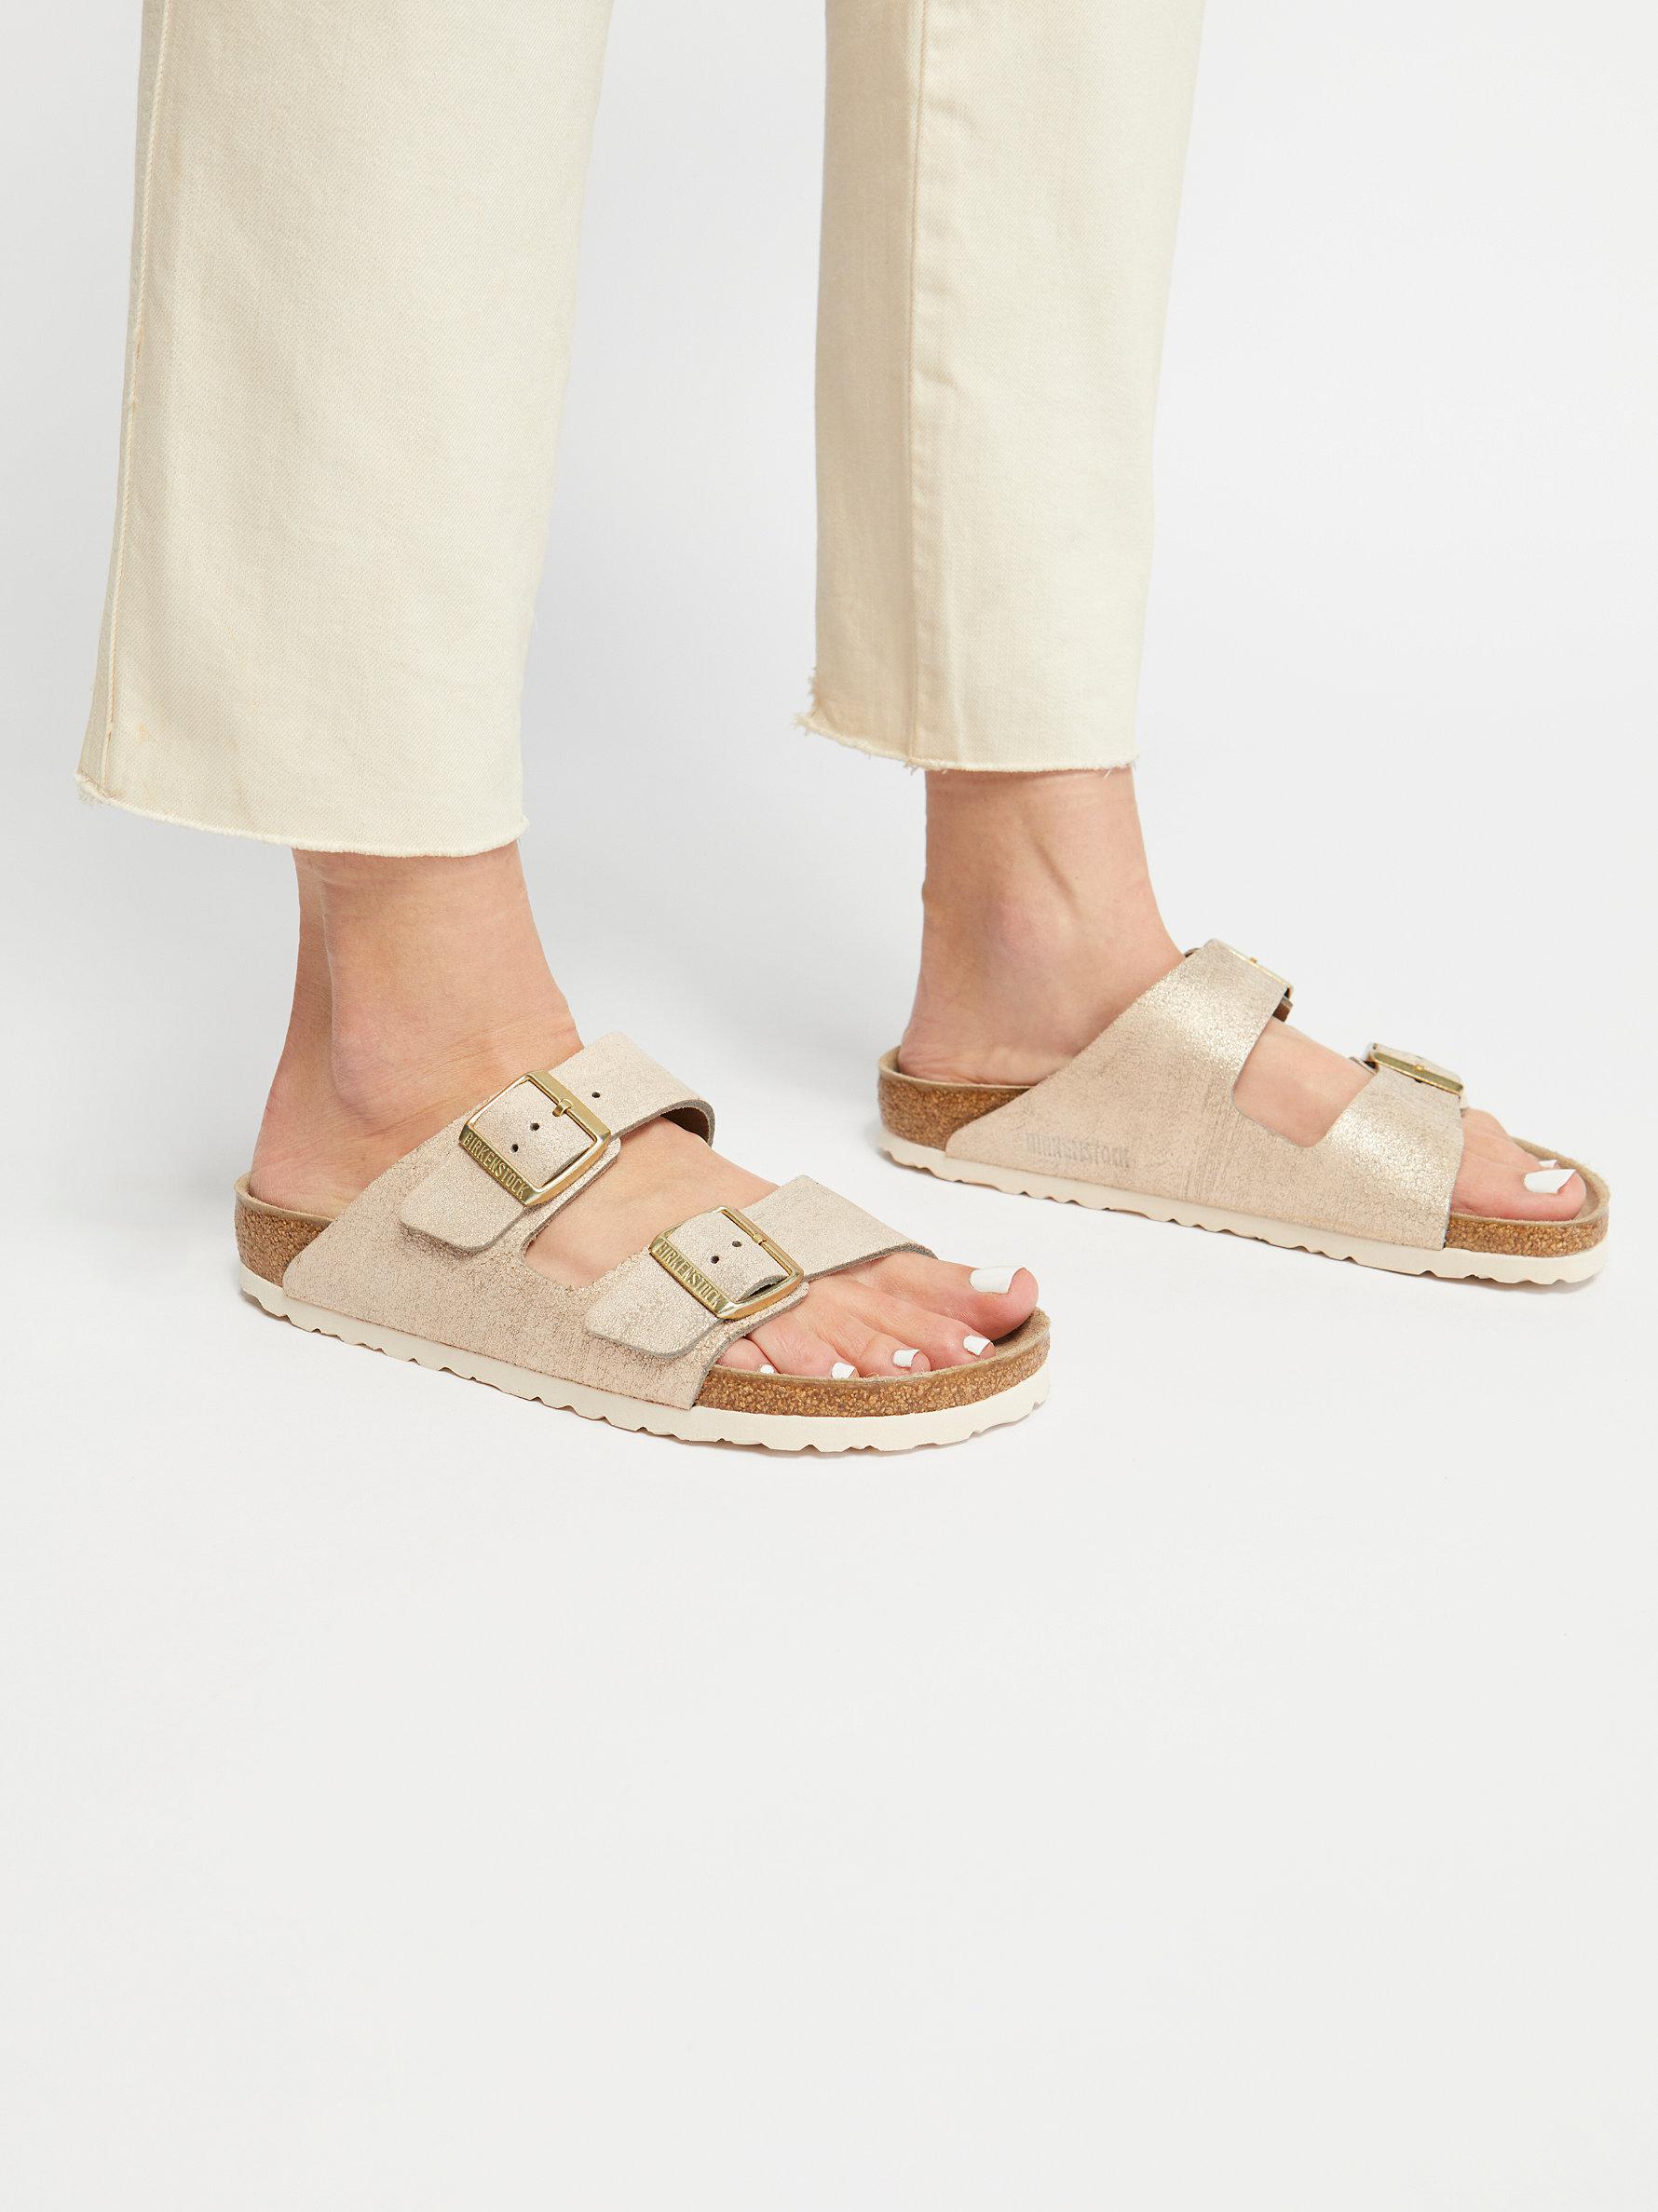 Birkenstock Arizona Washed Rose Gold Outlet Sale, UP TO 70% OFF |  agrichembio.com